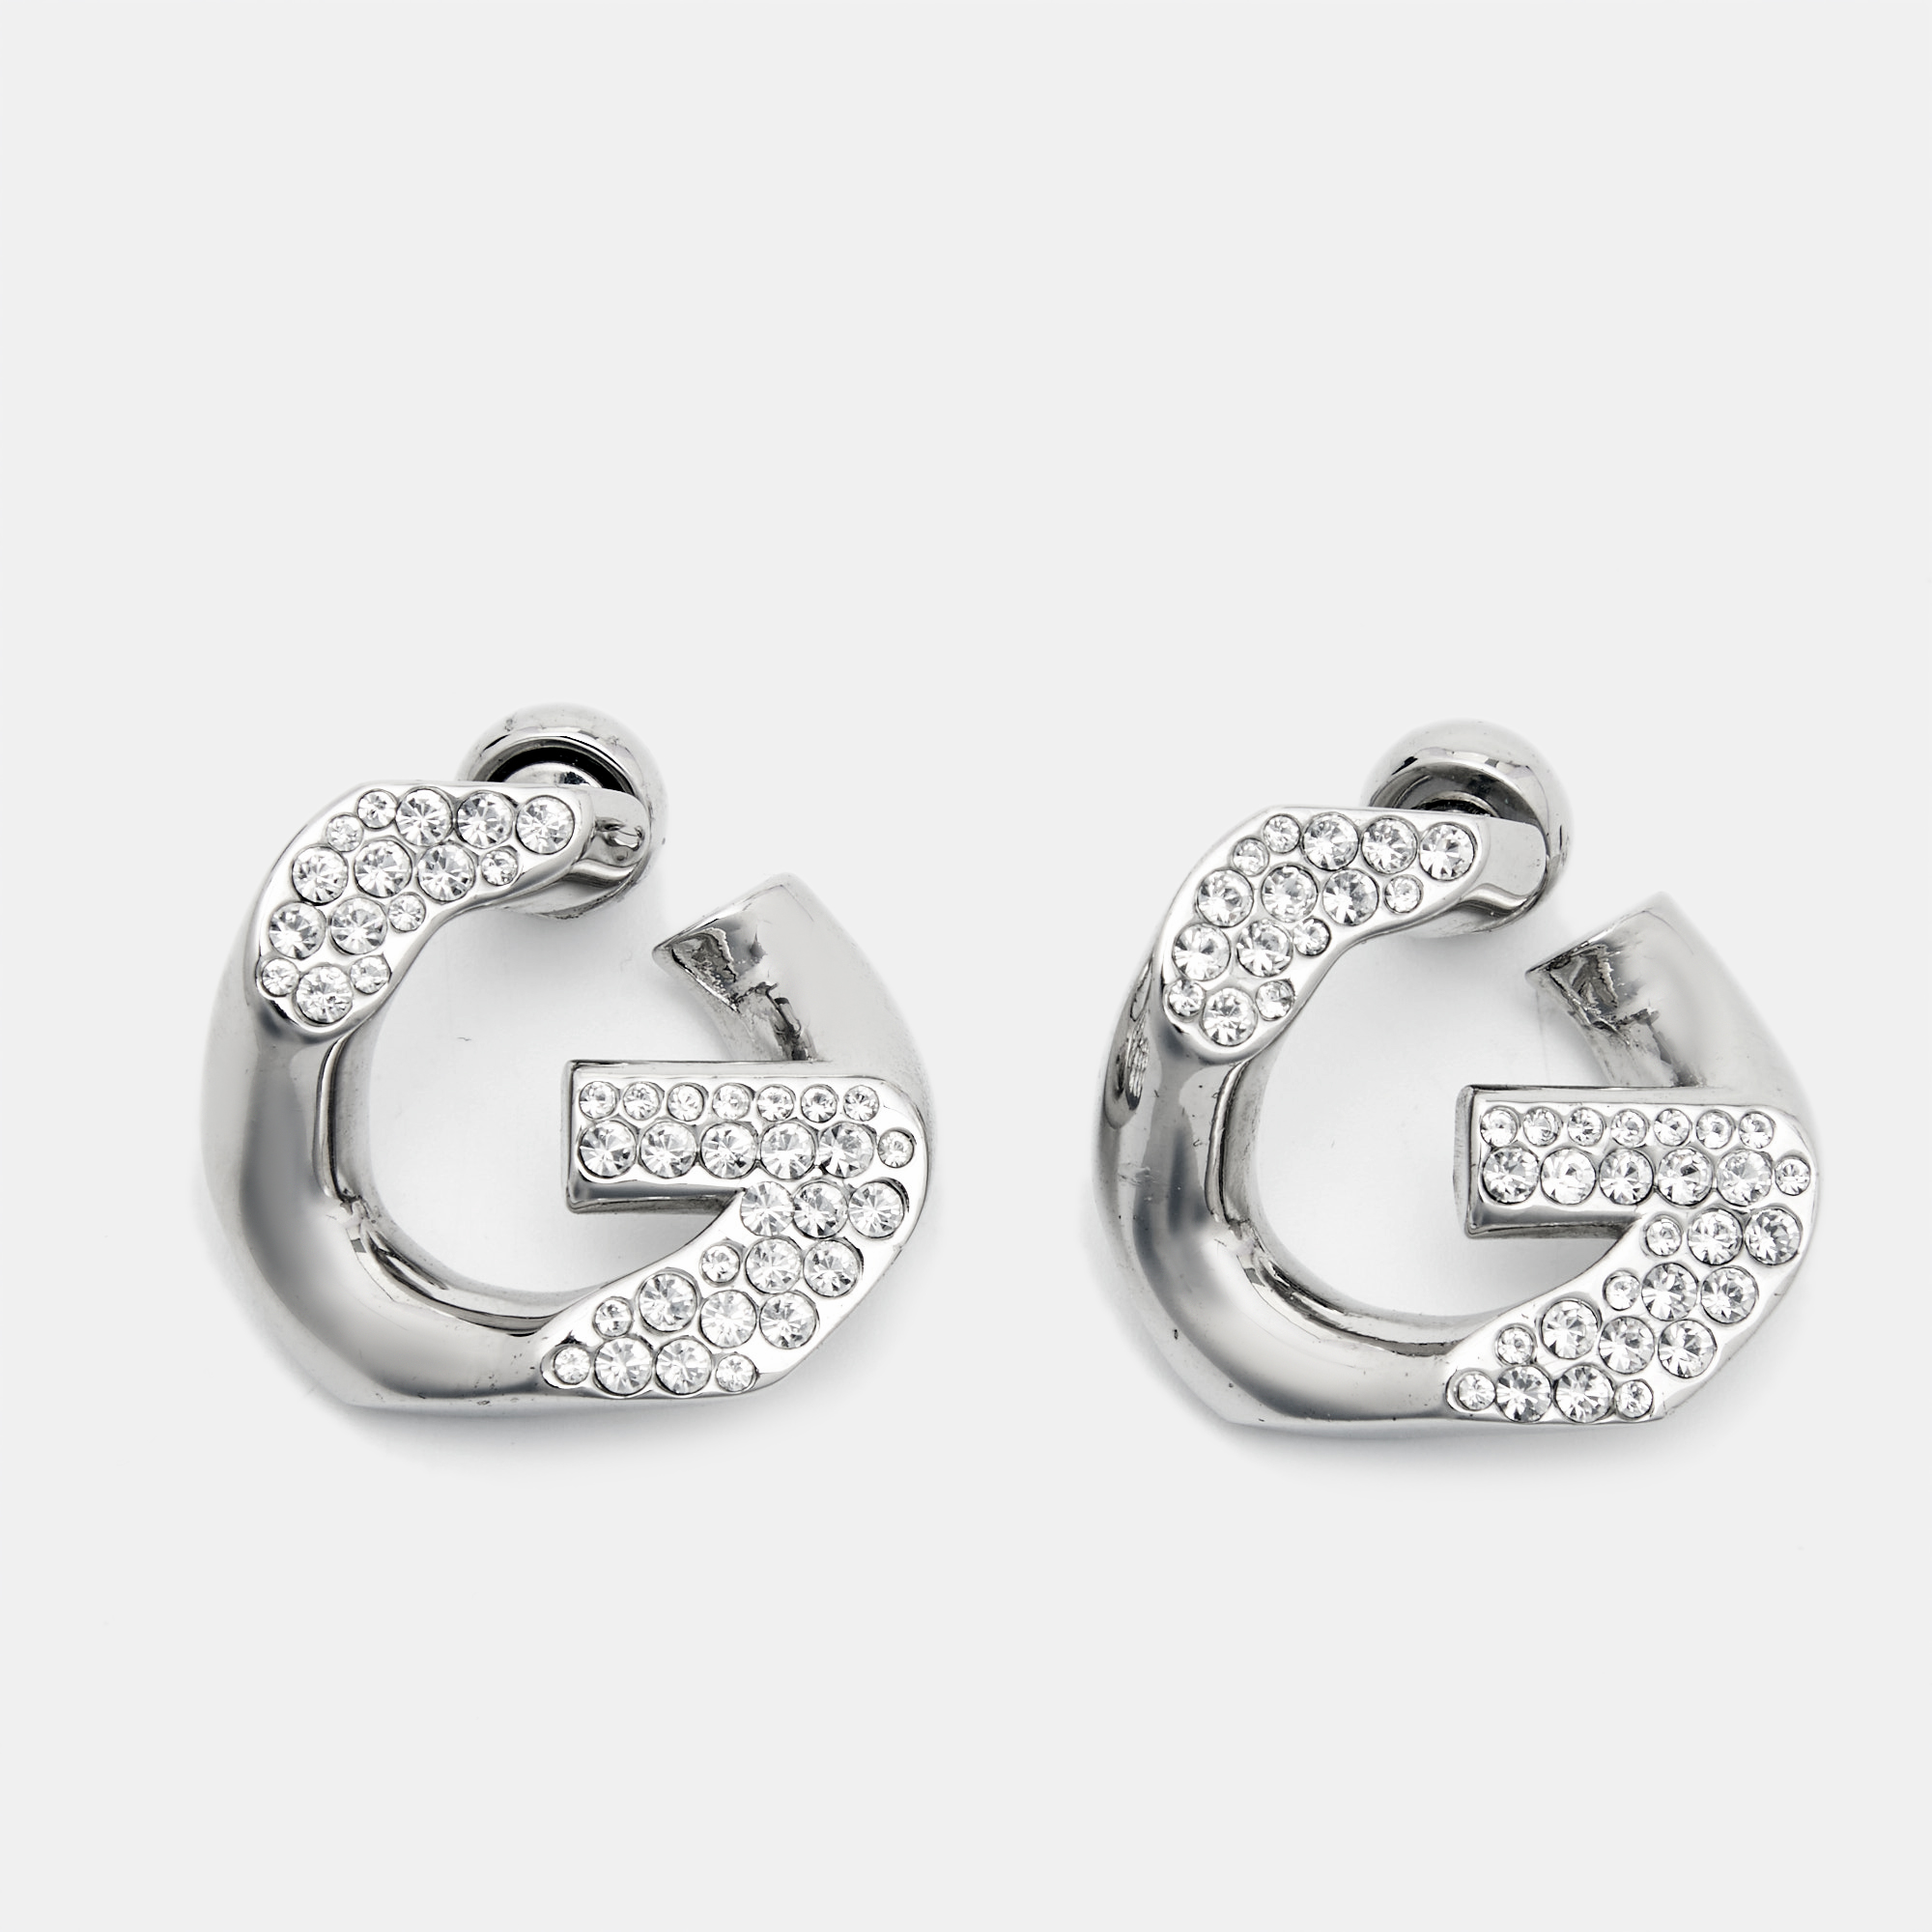 Givenchy g crystal silver tone earrings